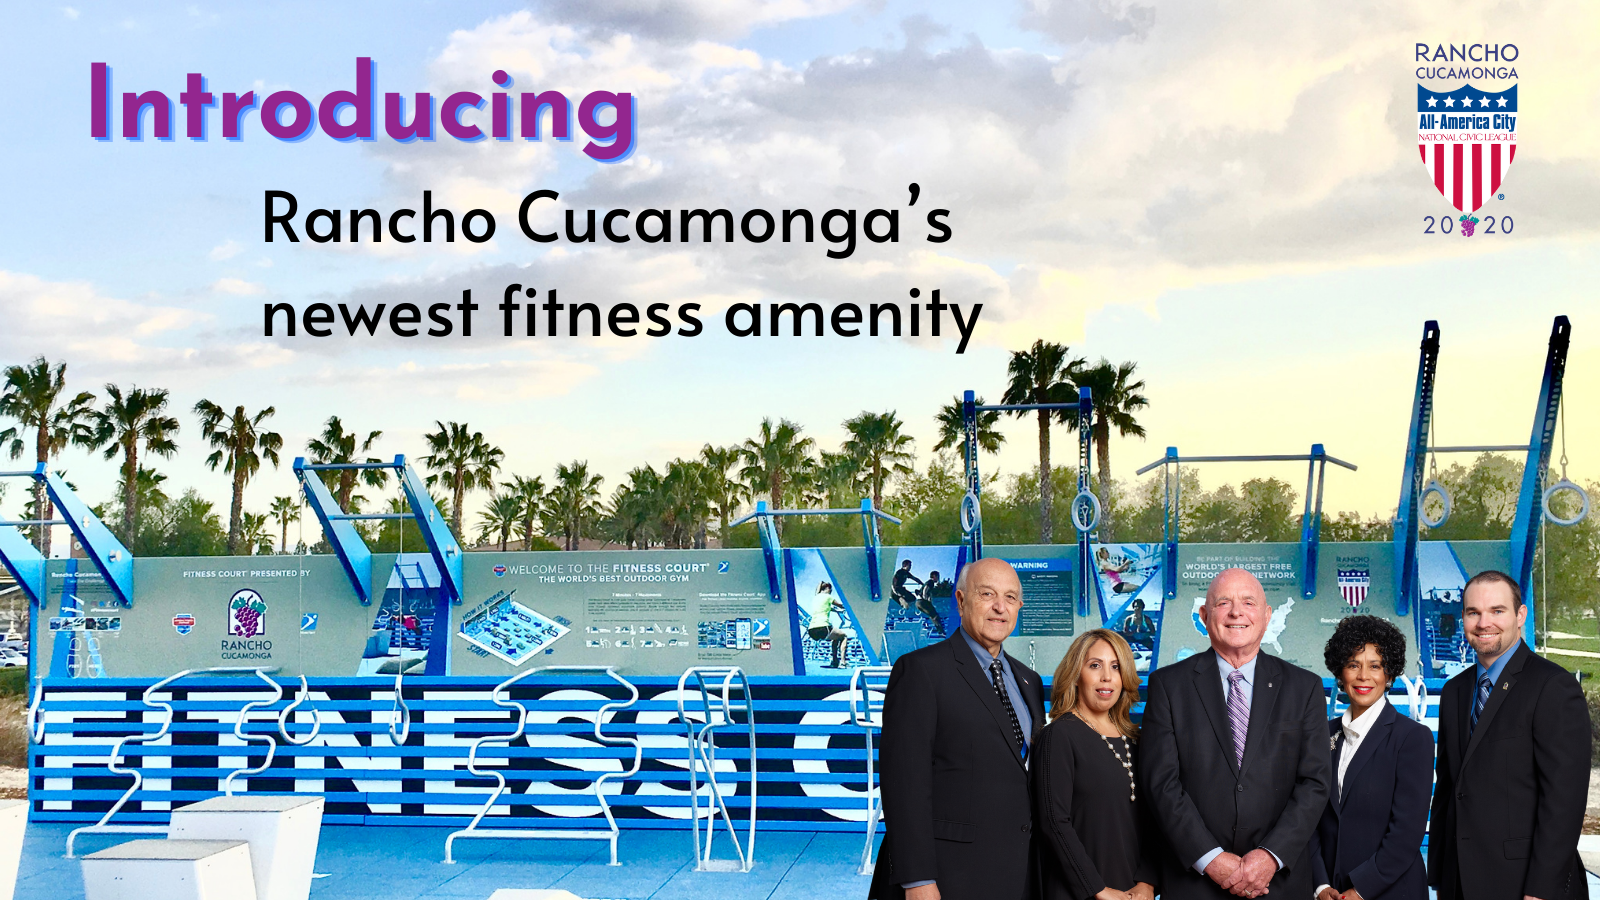 Introducing Rancho Cucamonga's newest fitness amenity. Picture of outdoor fitness court with city council